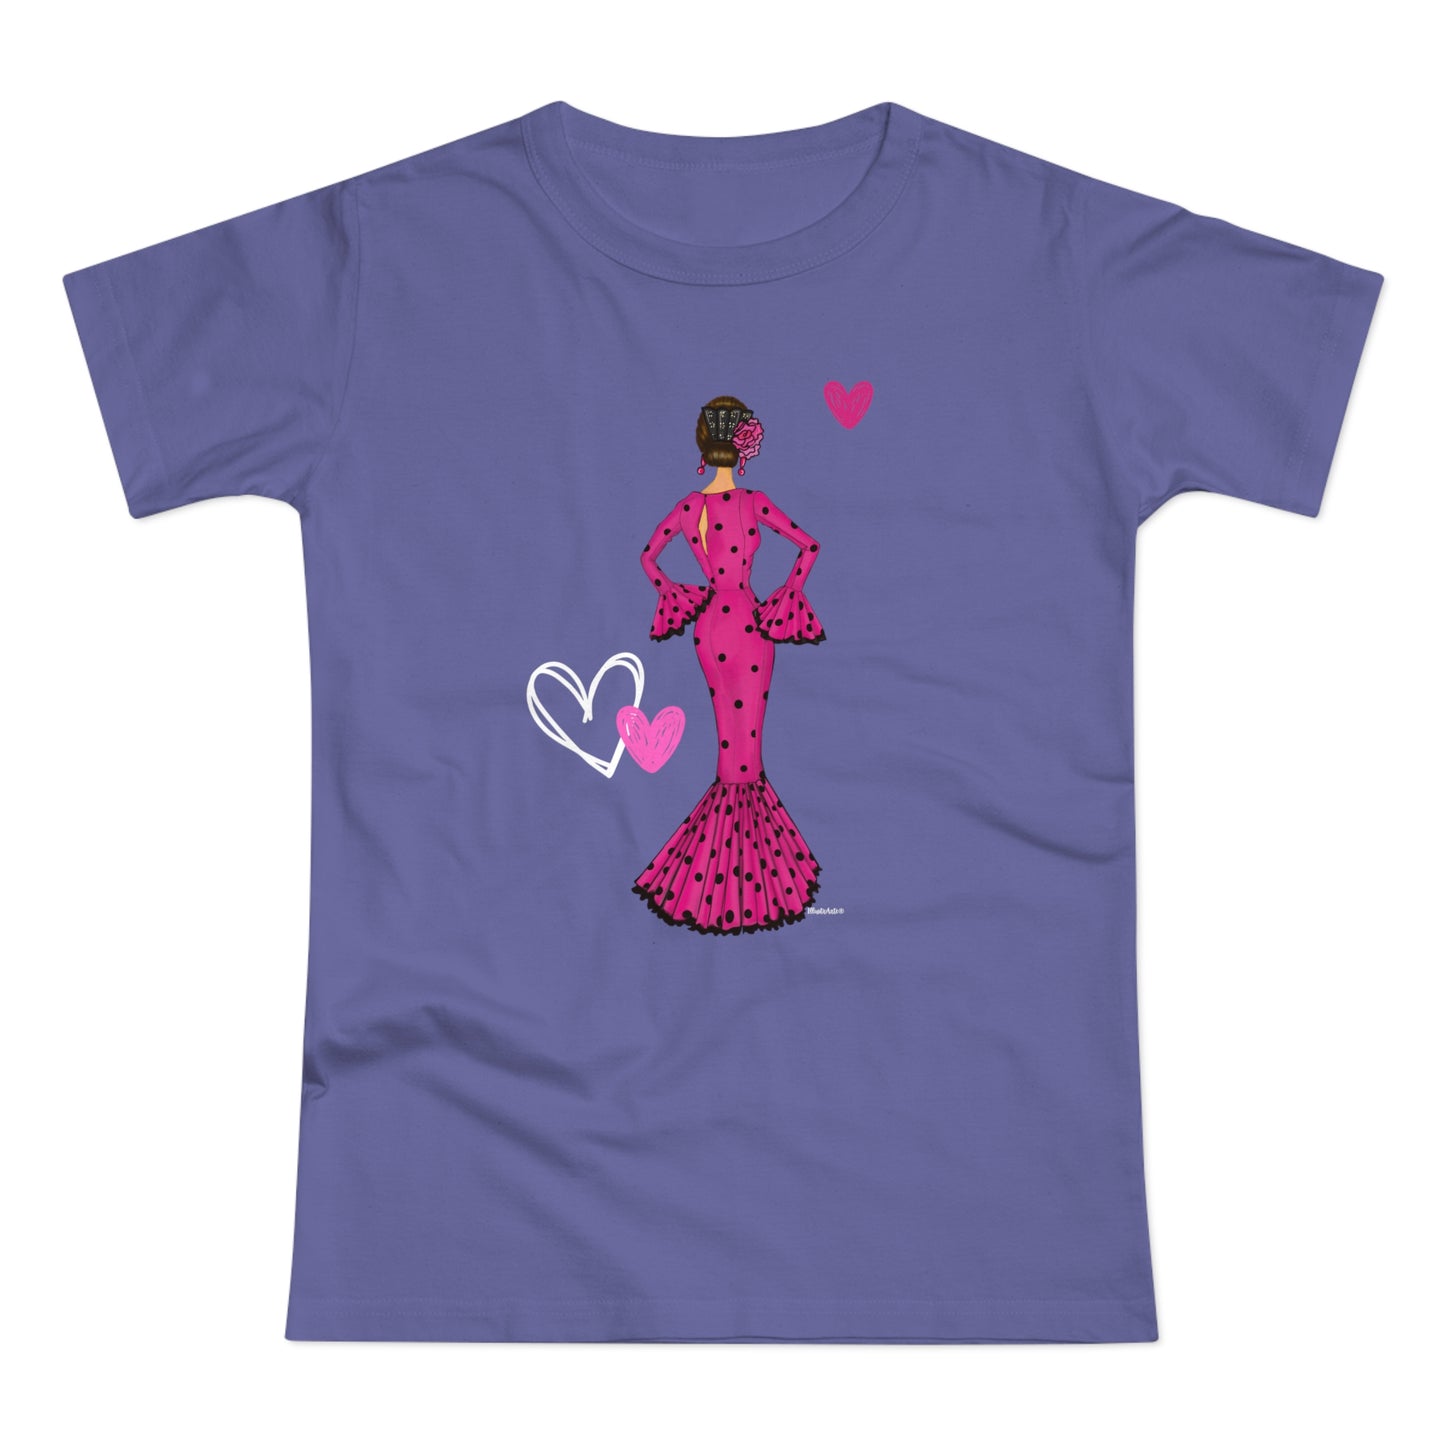 a purple t - shirt with a woman in a pink dress holding a heart